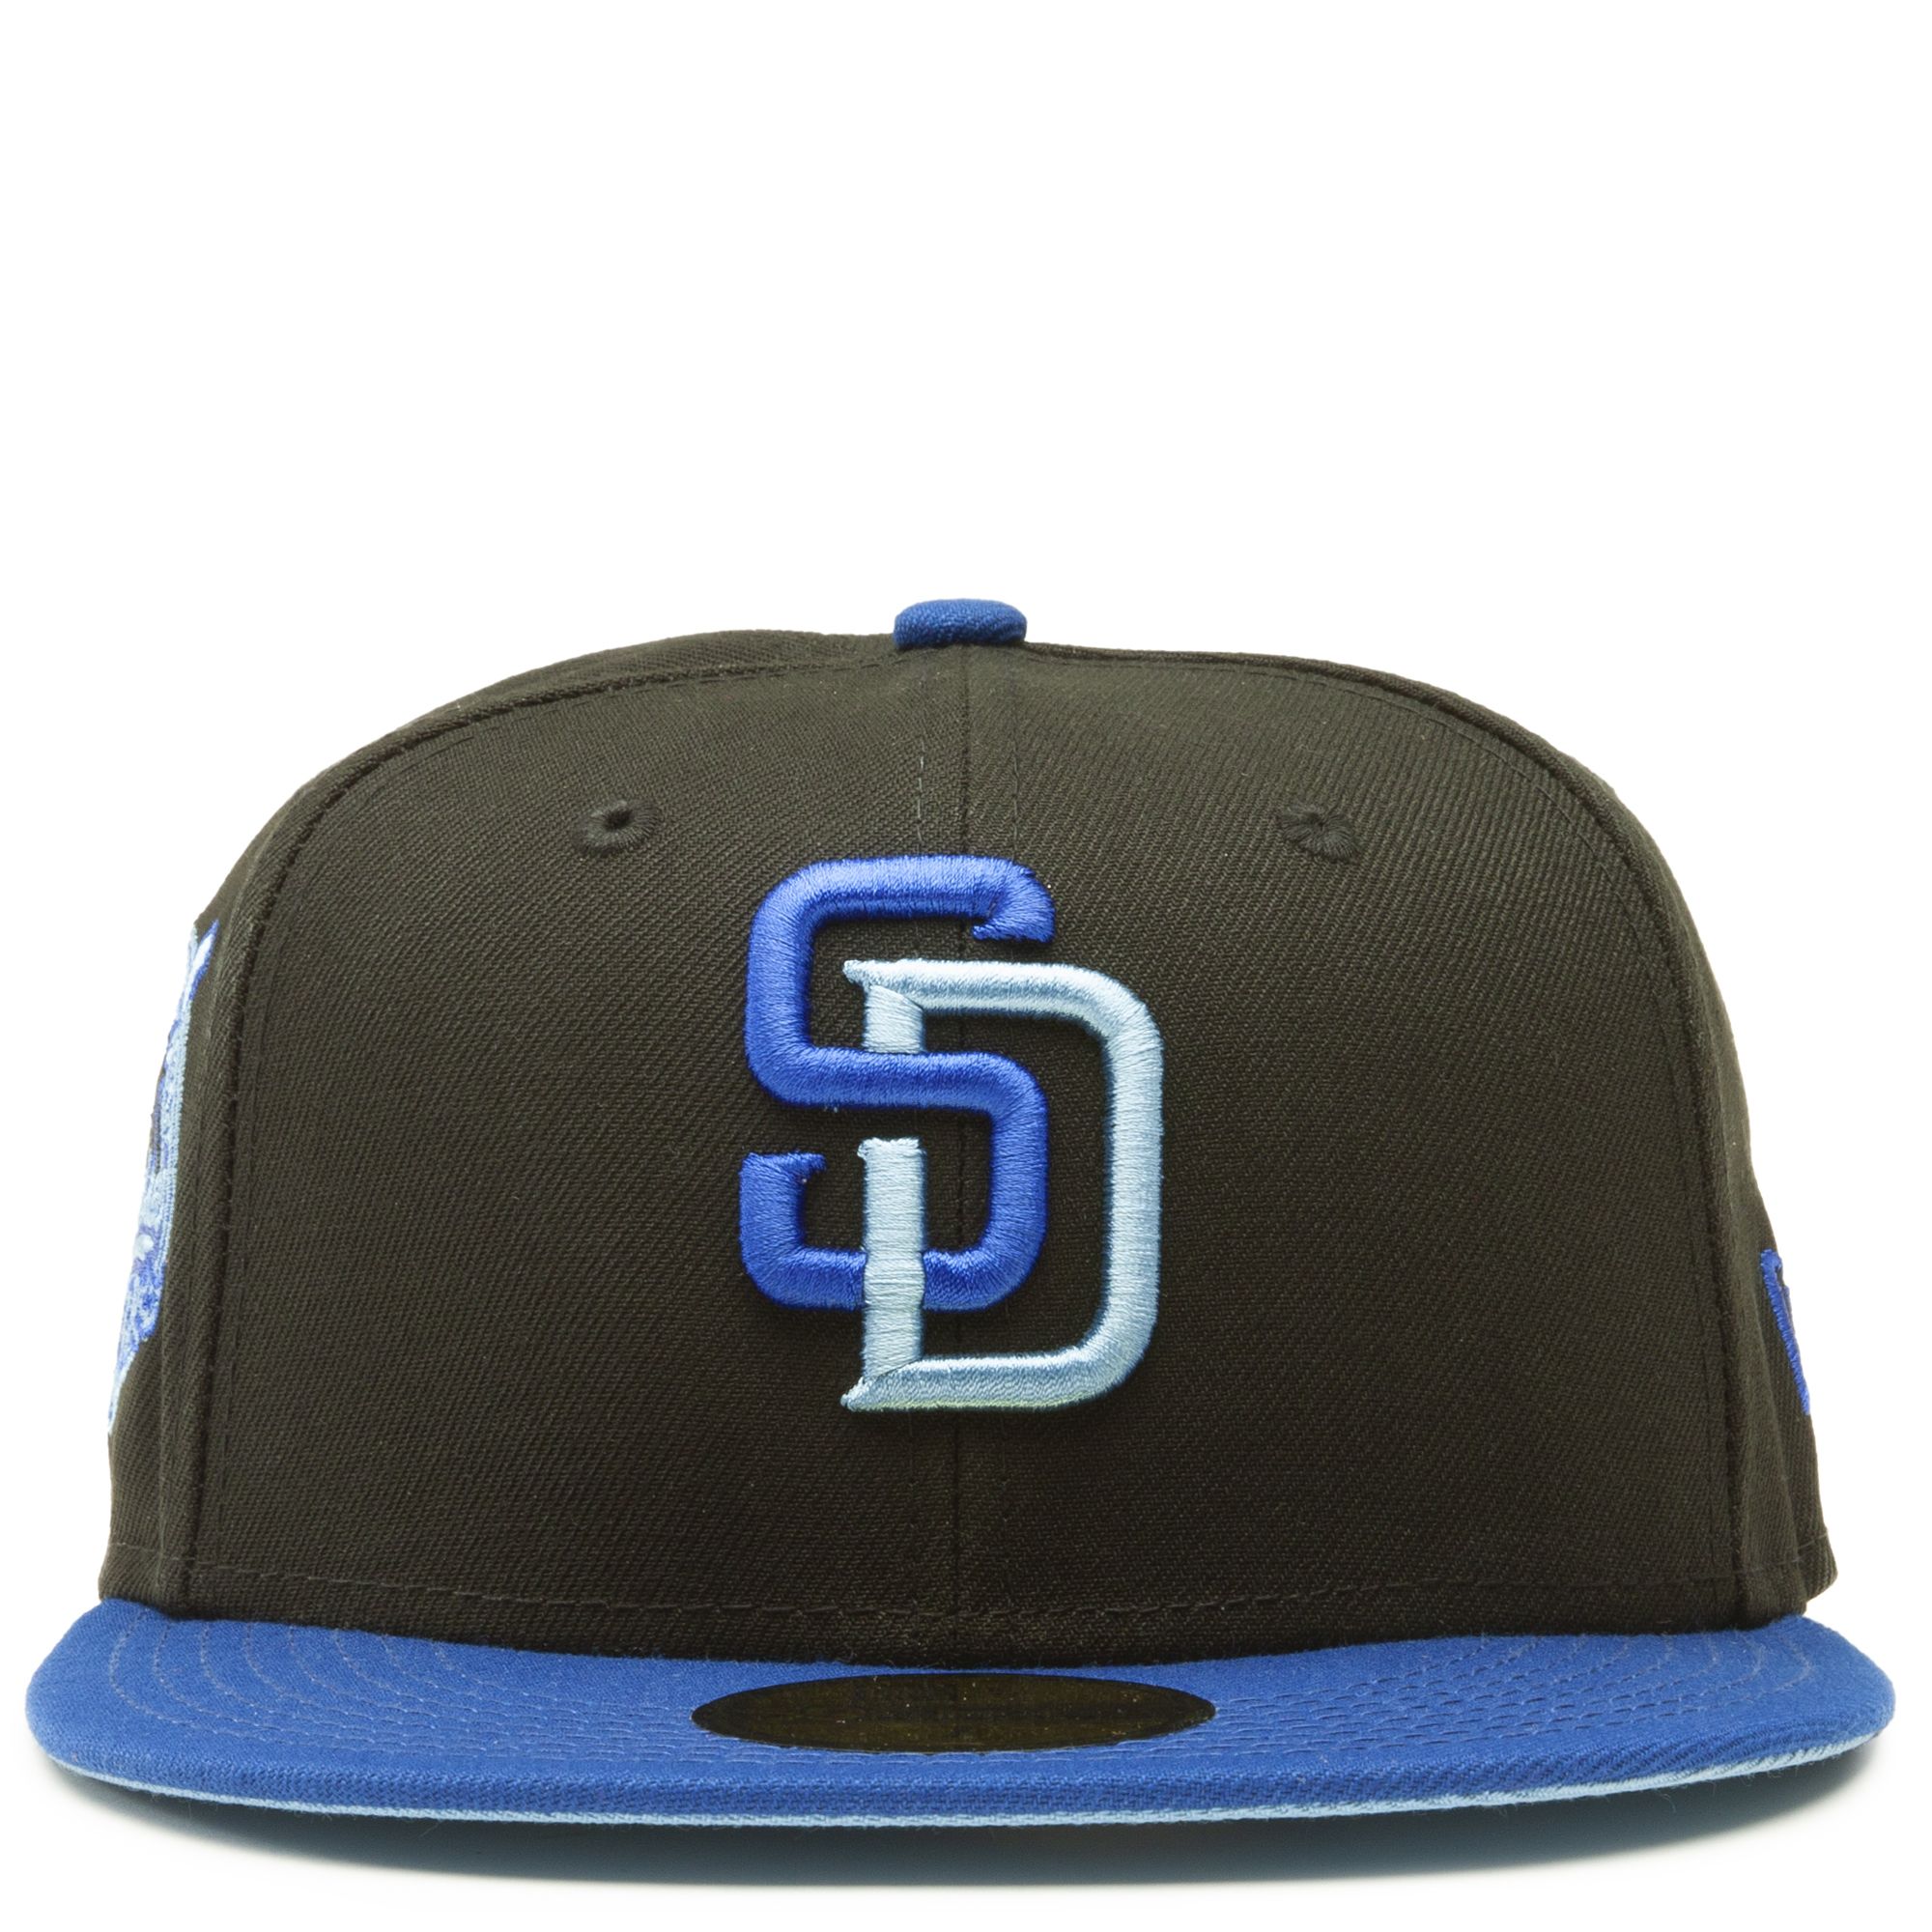 Men's San Diego Padres New Era Light Blue 59FIFTY Fitted Hat